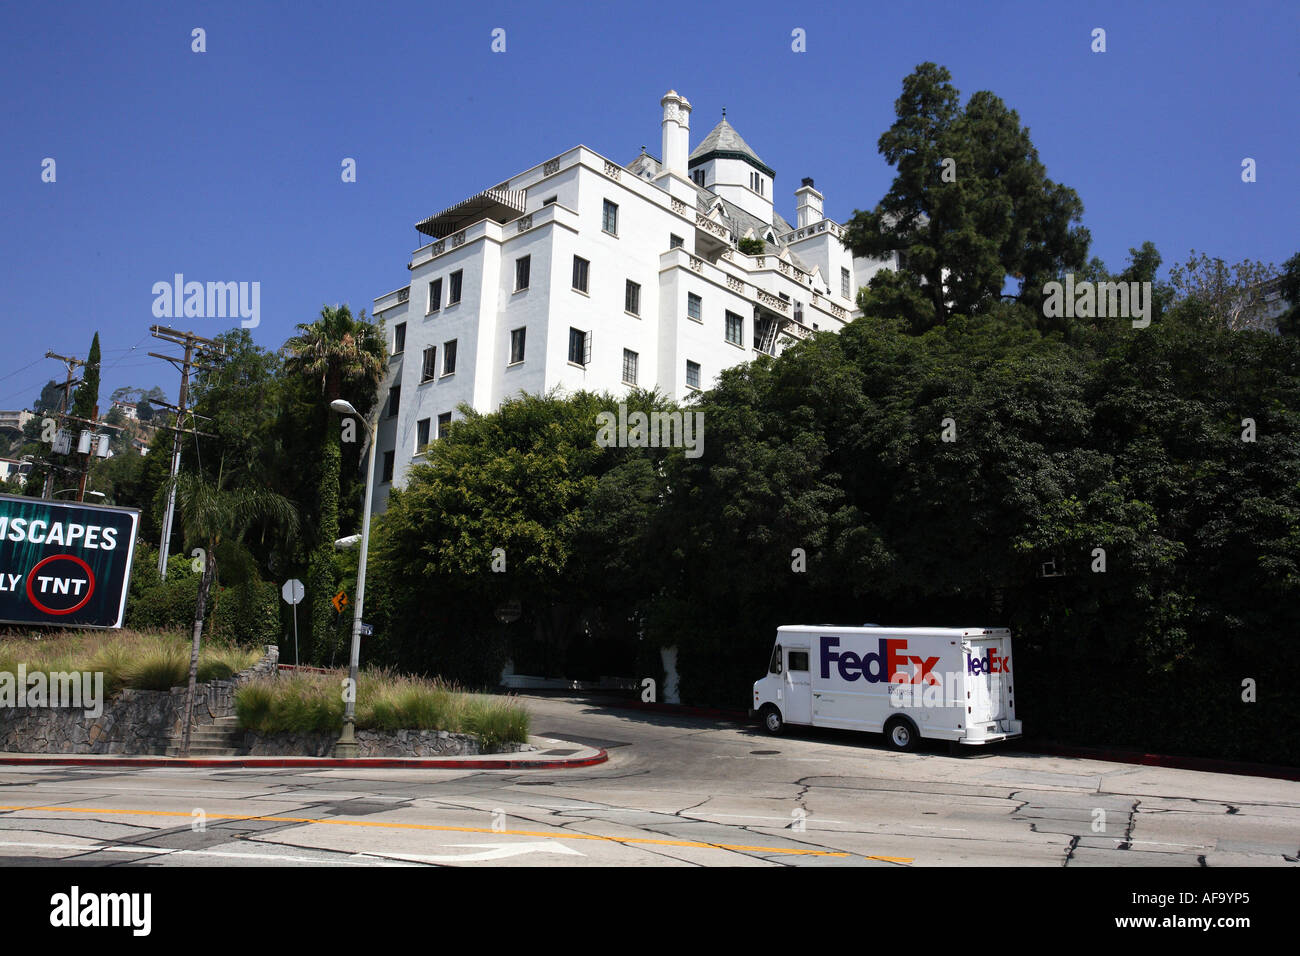 Chateau Marmont hotel in Hollywood Los Angeles ,U.S.A Stock Photo